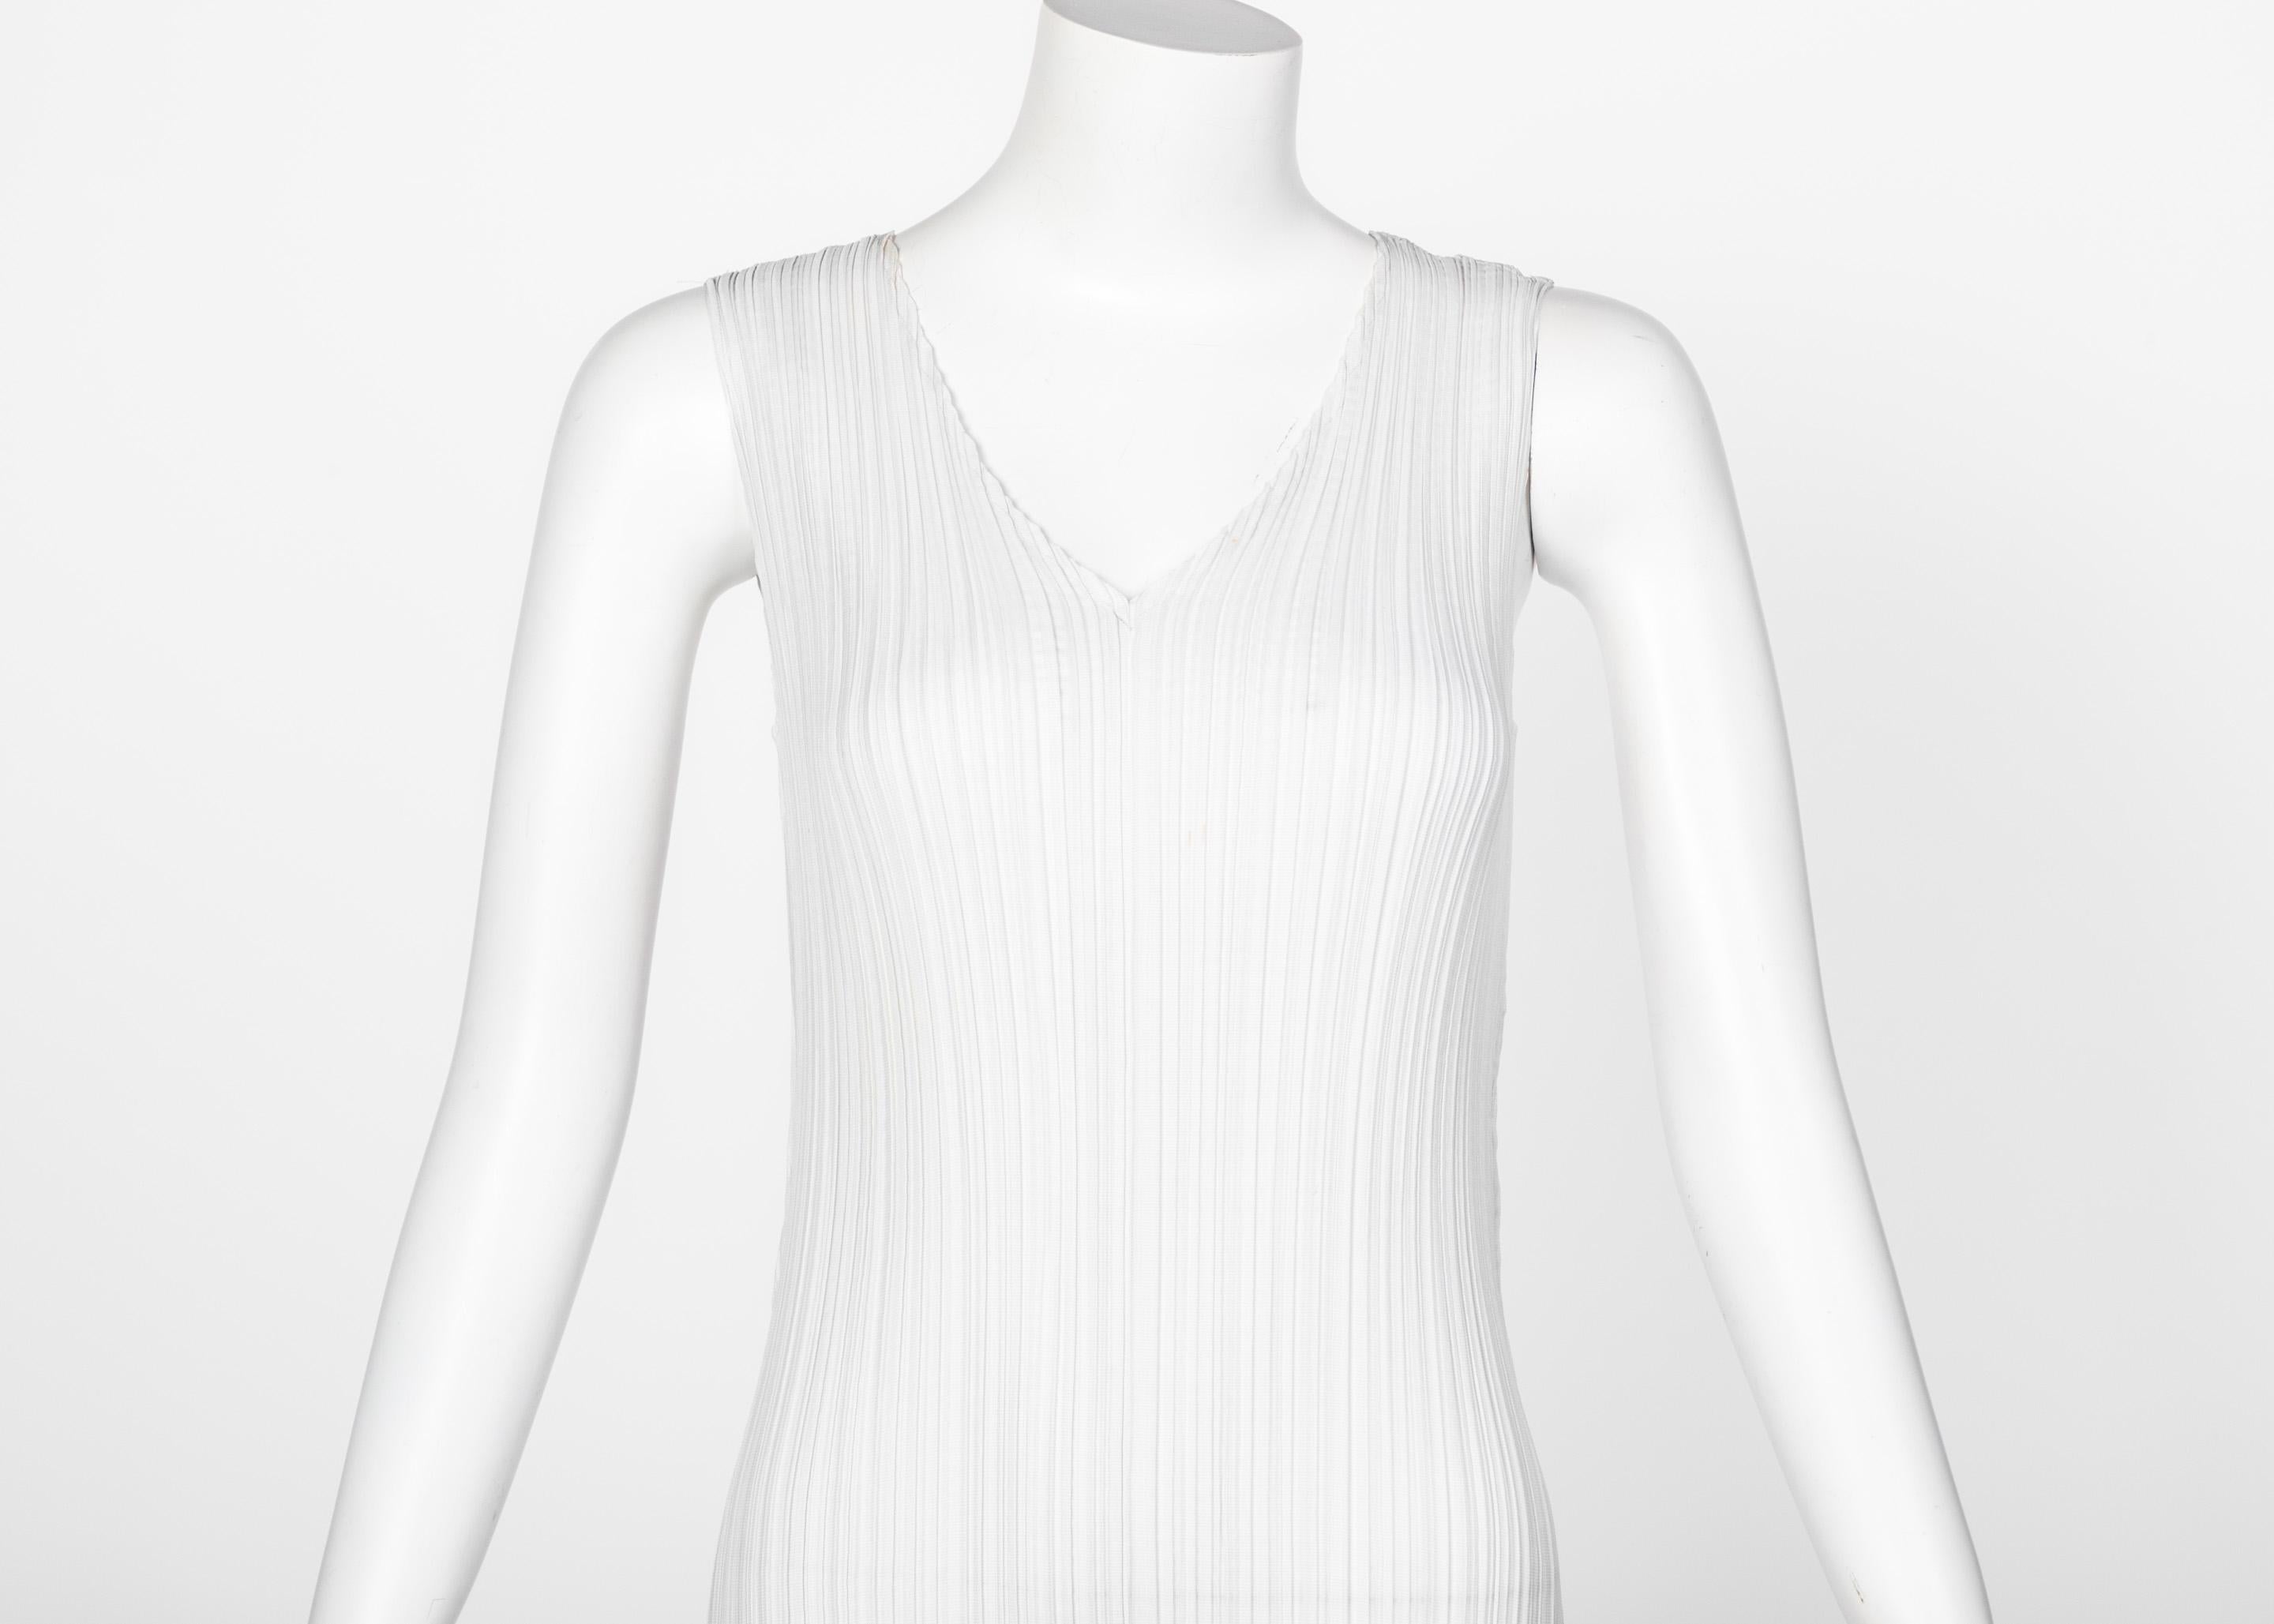 Issey Miyake “A Piece of Cloth” 2-Way White Gray Sleeveless Sculptural Dress For Sale 2